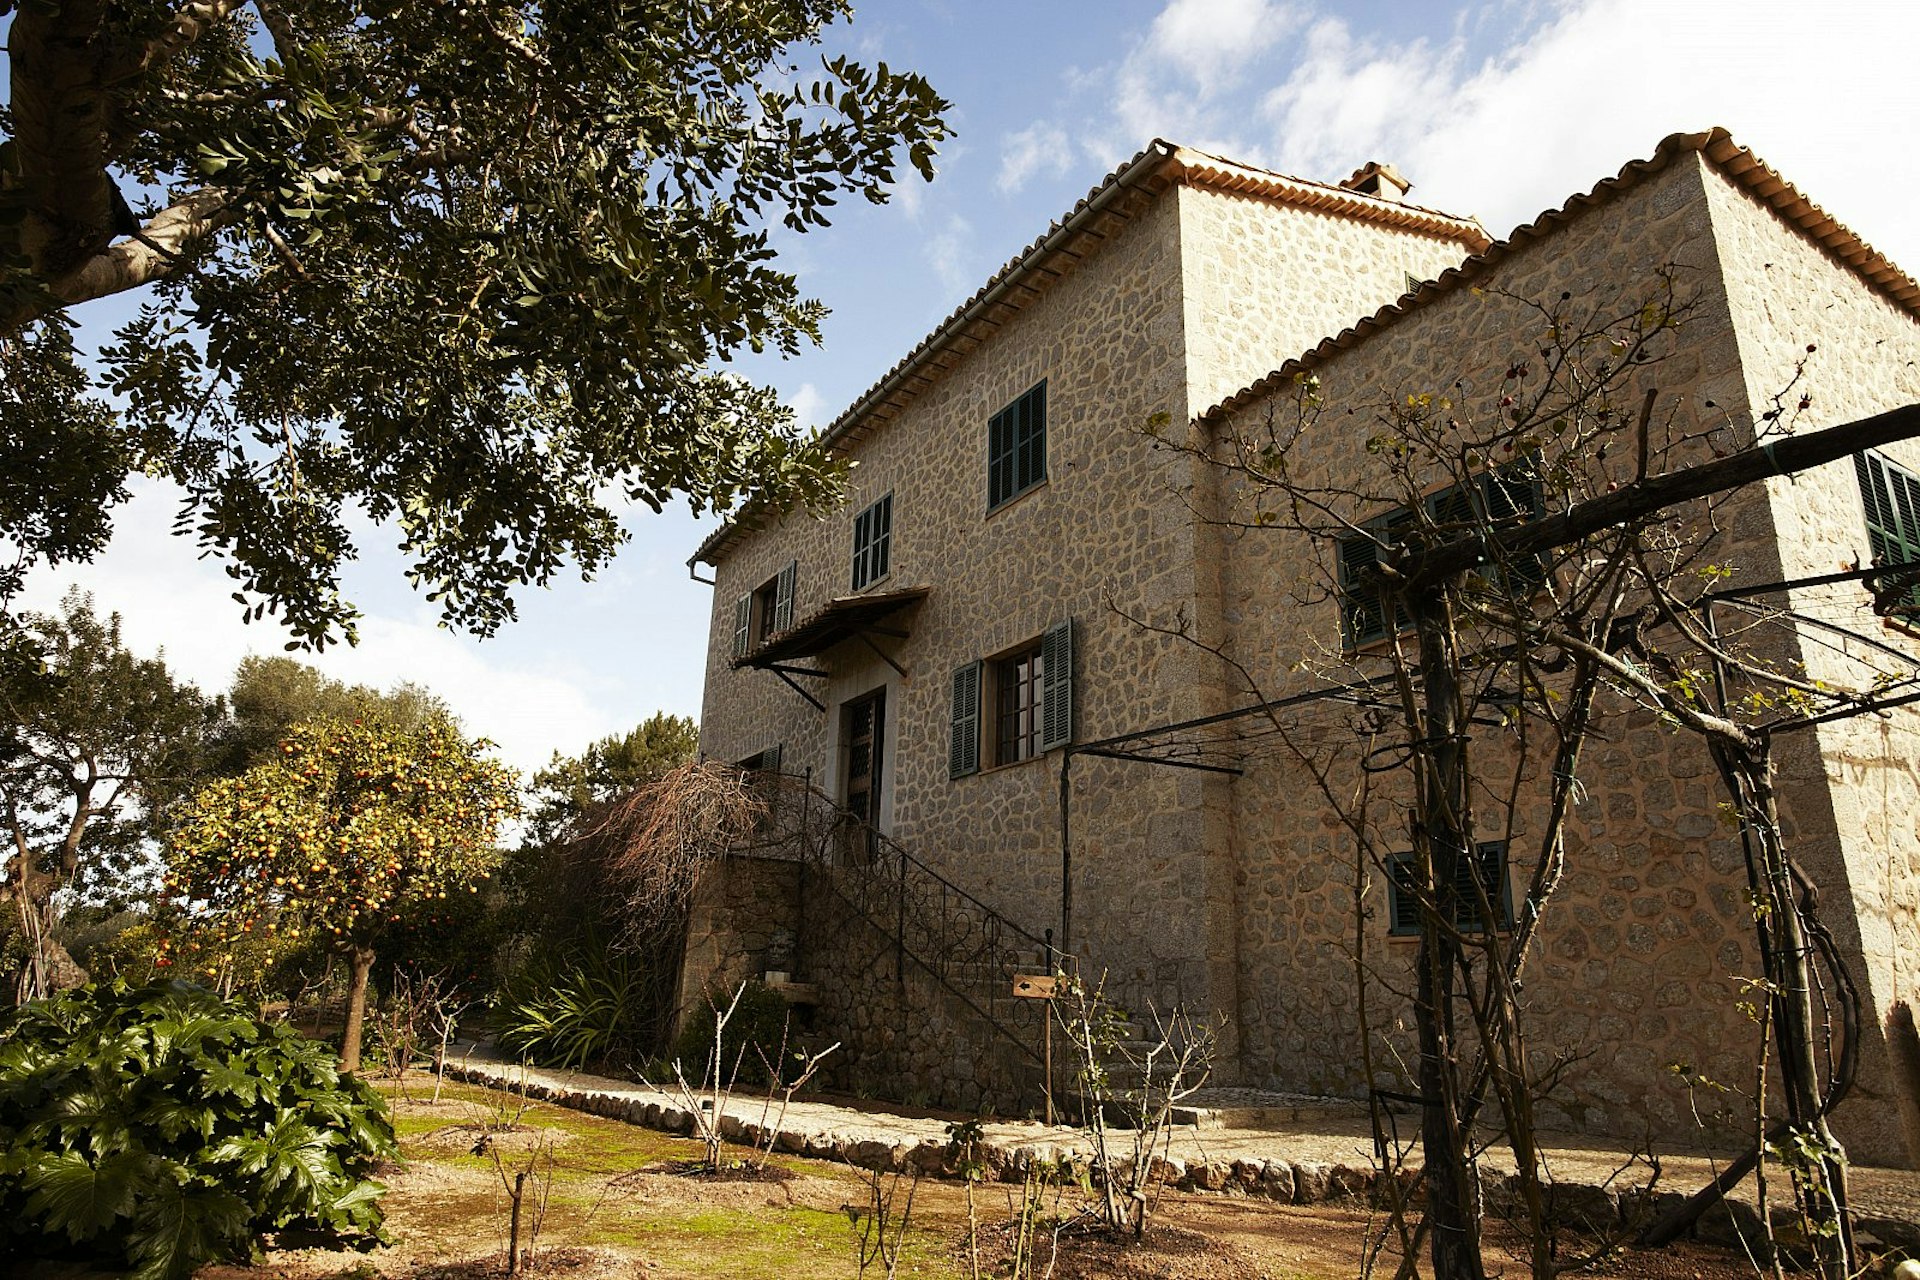 The three-storey stone building housing Casa Robert Graves, set in a garden full of trees.